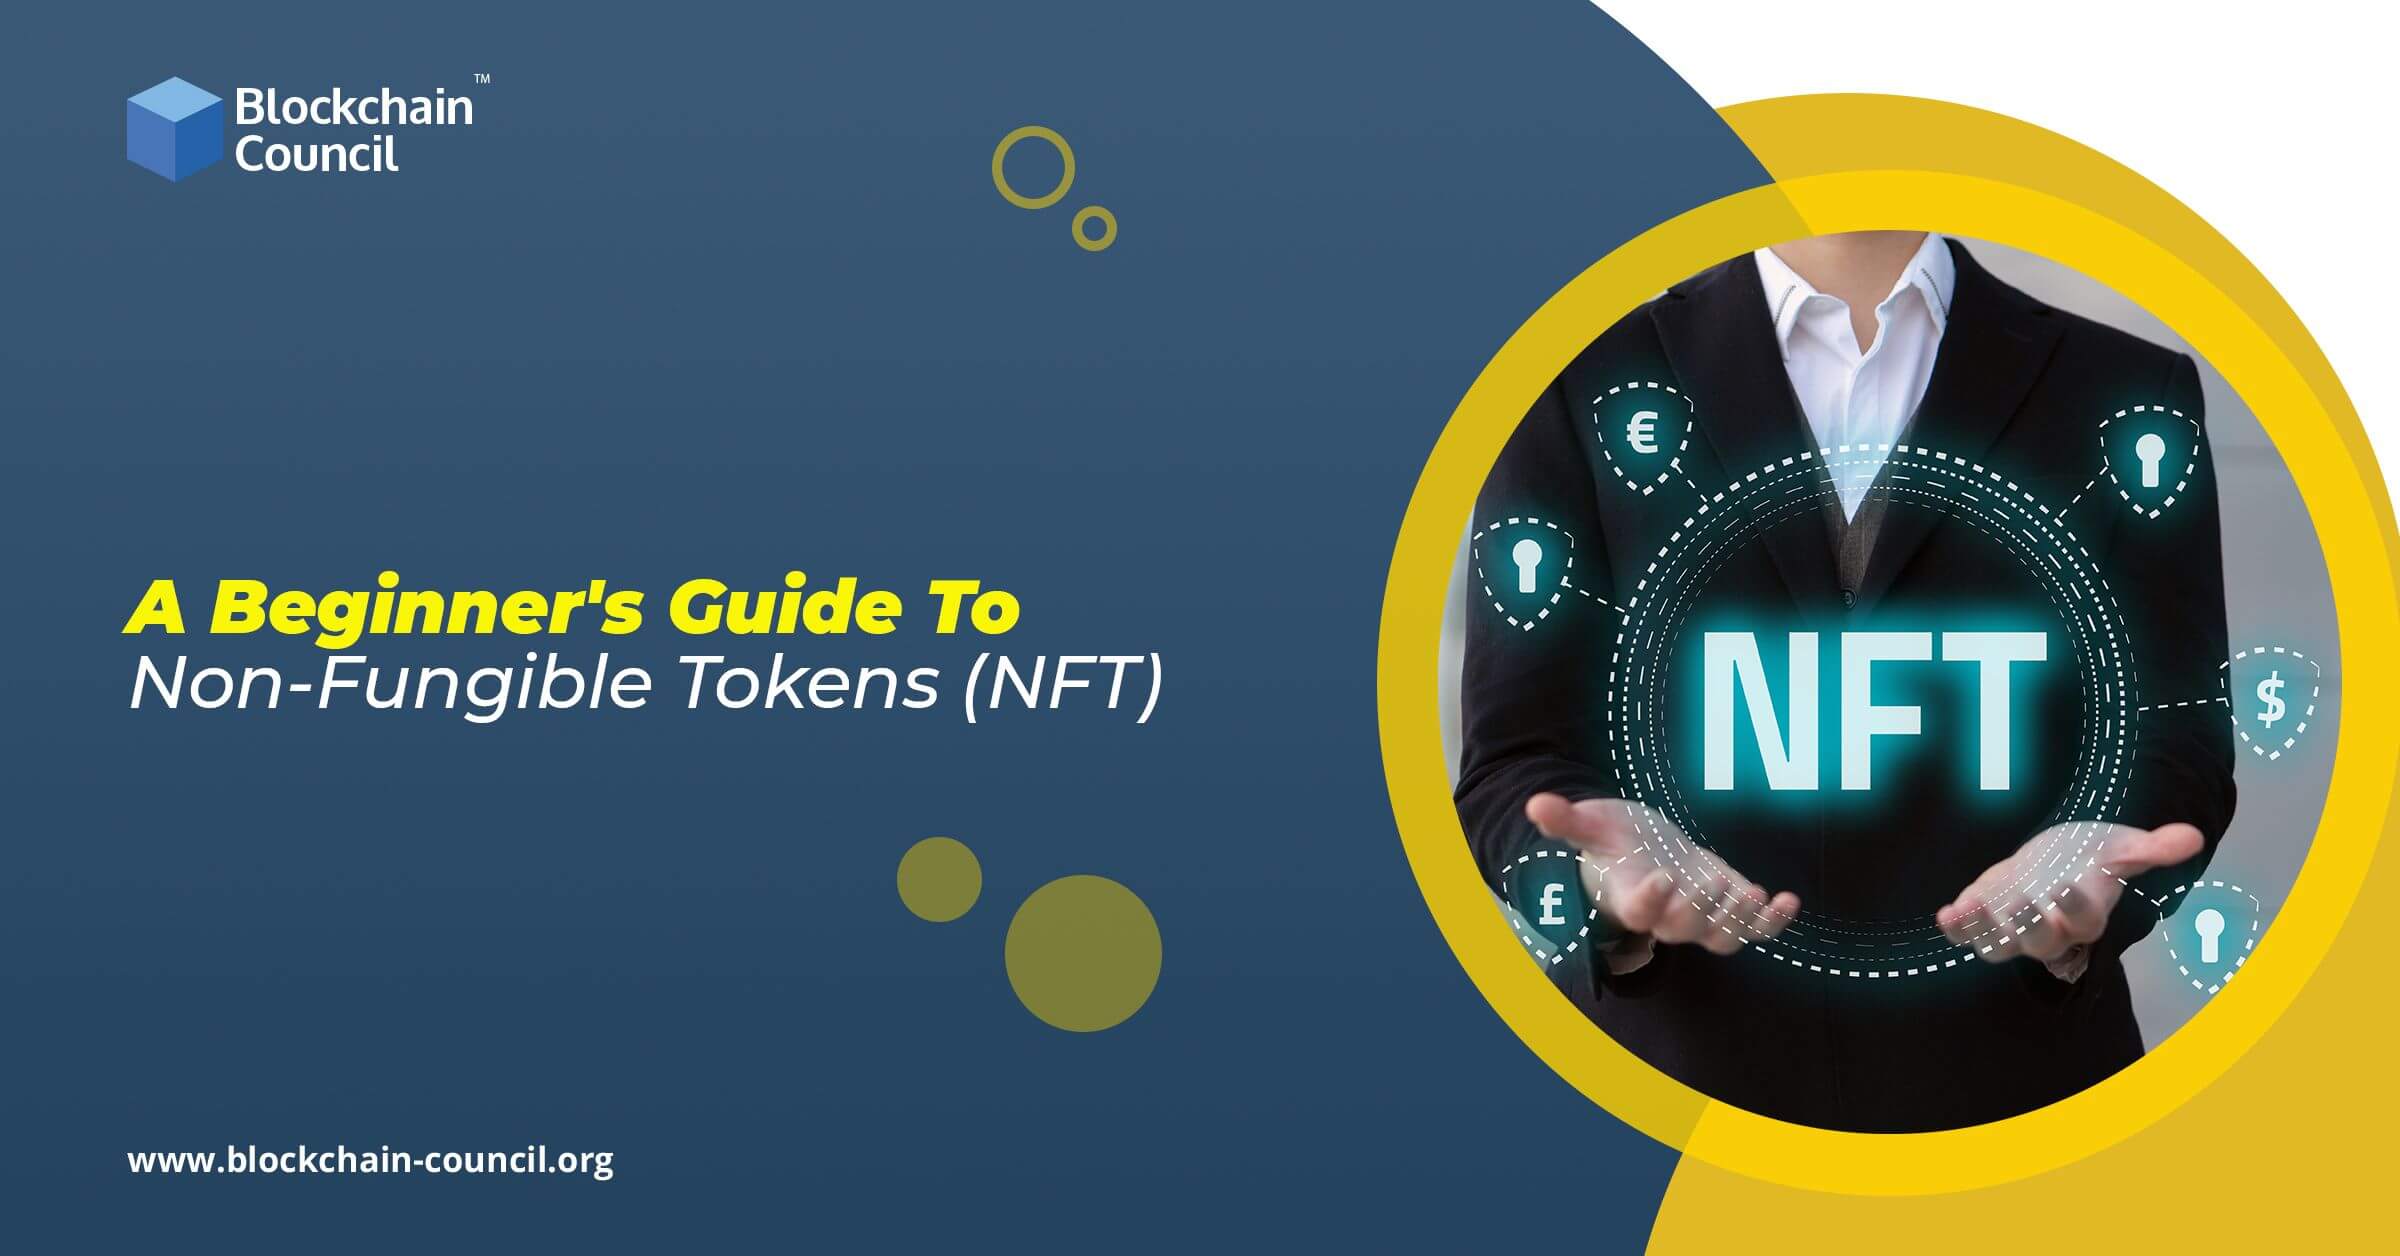 A Beginner's Guide To Non-Fungible Tokens (NFT)